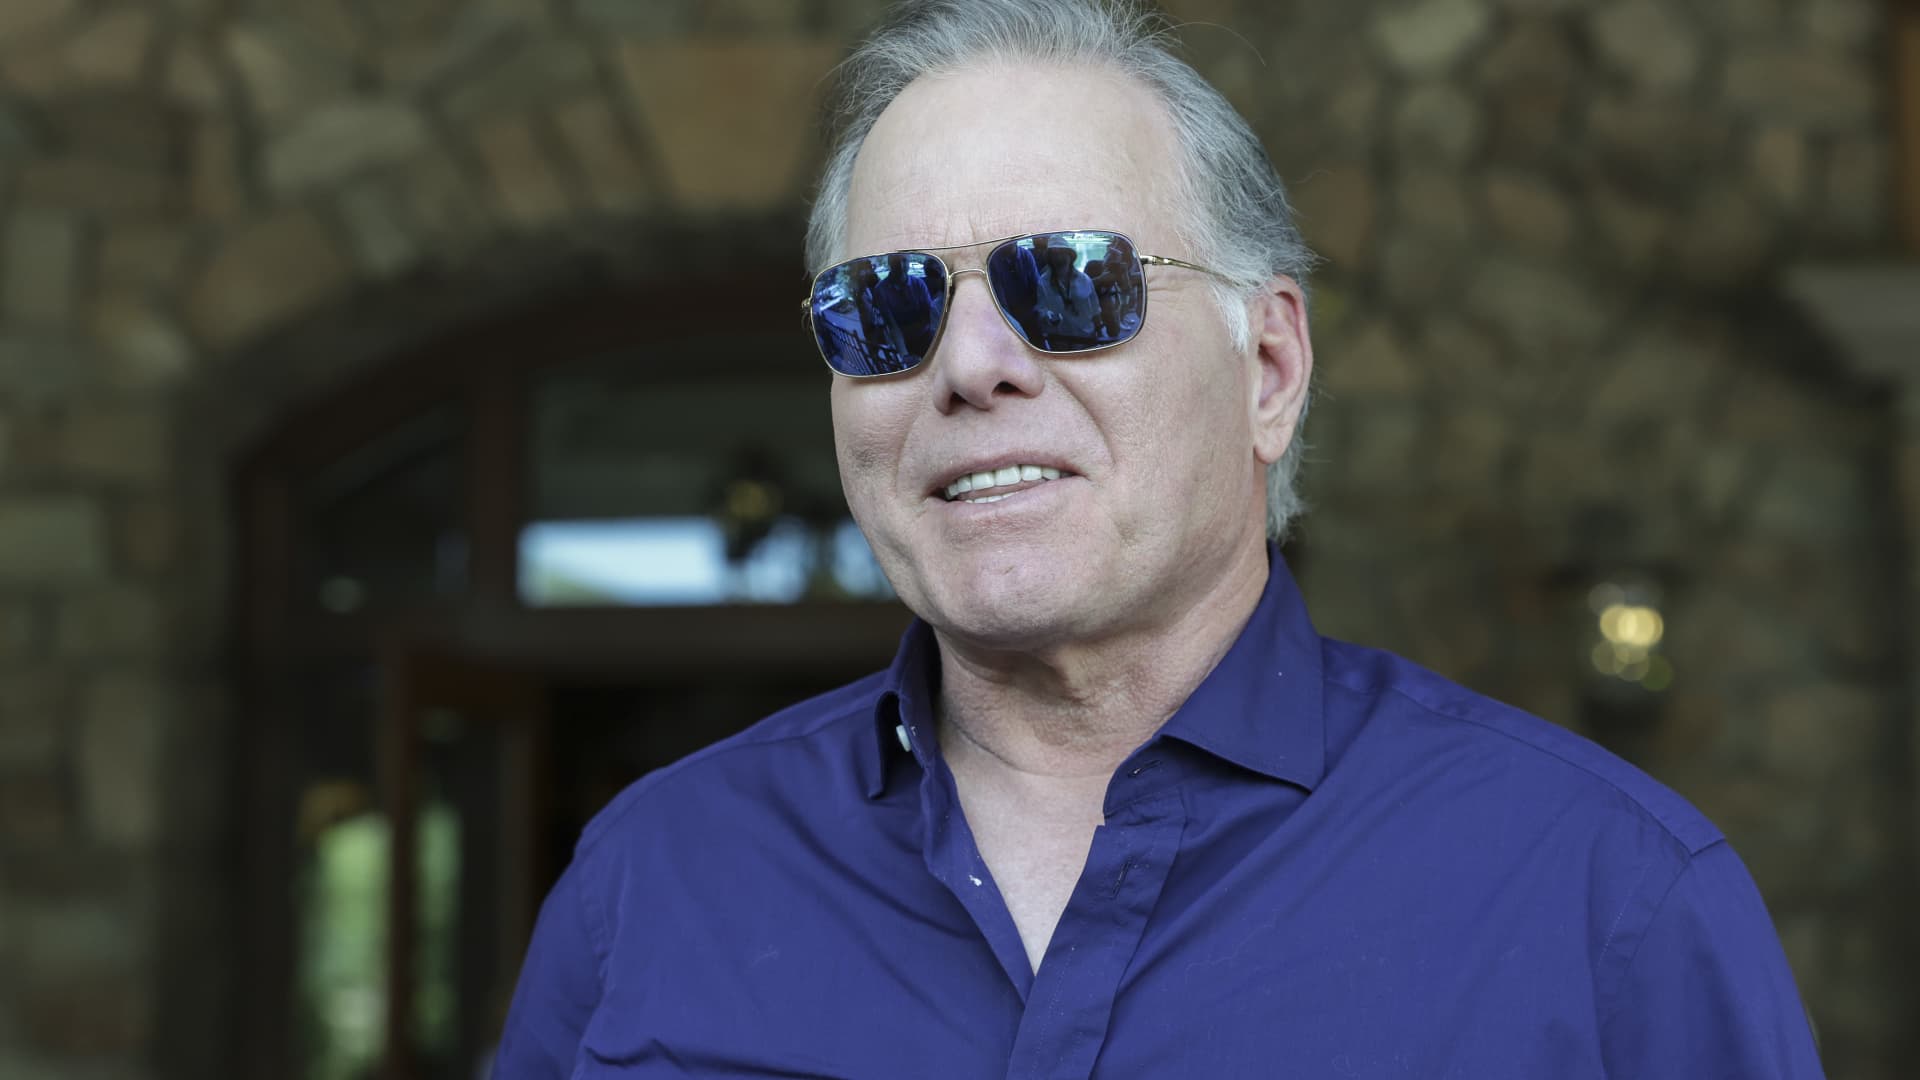 David Zaslav, President and CEO of Warner Bros. Discovery talks to the media as he arrives at the Sun Valley Resort for the Allen & Company Sun Valley Conference on July 05, 2022 in Sun Valley, Idaho.